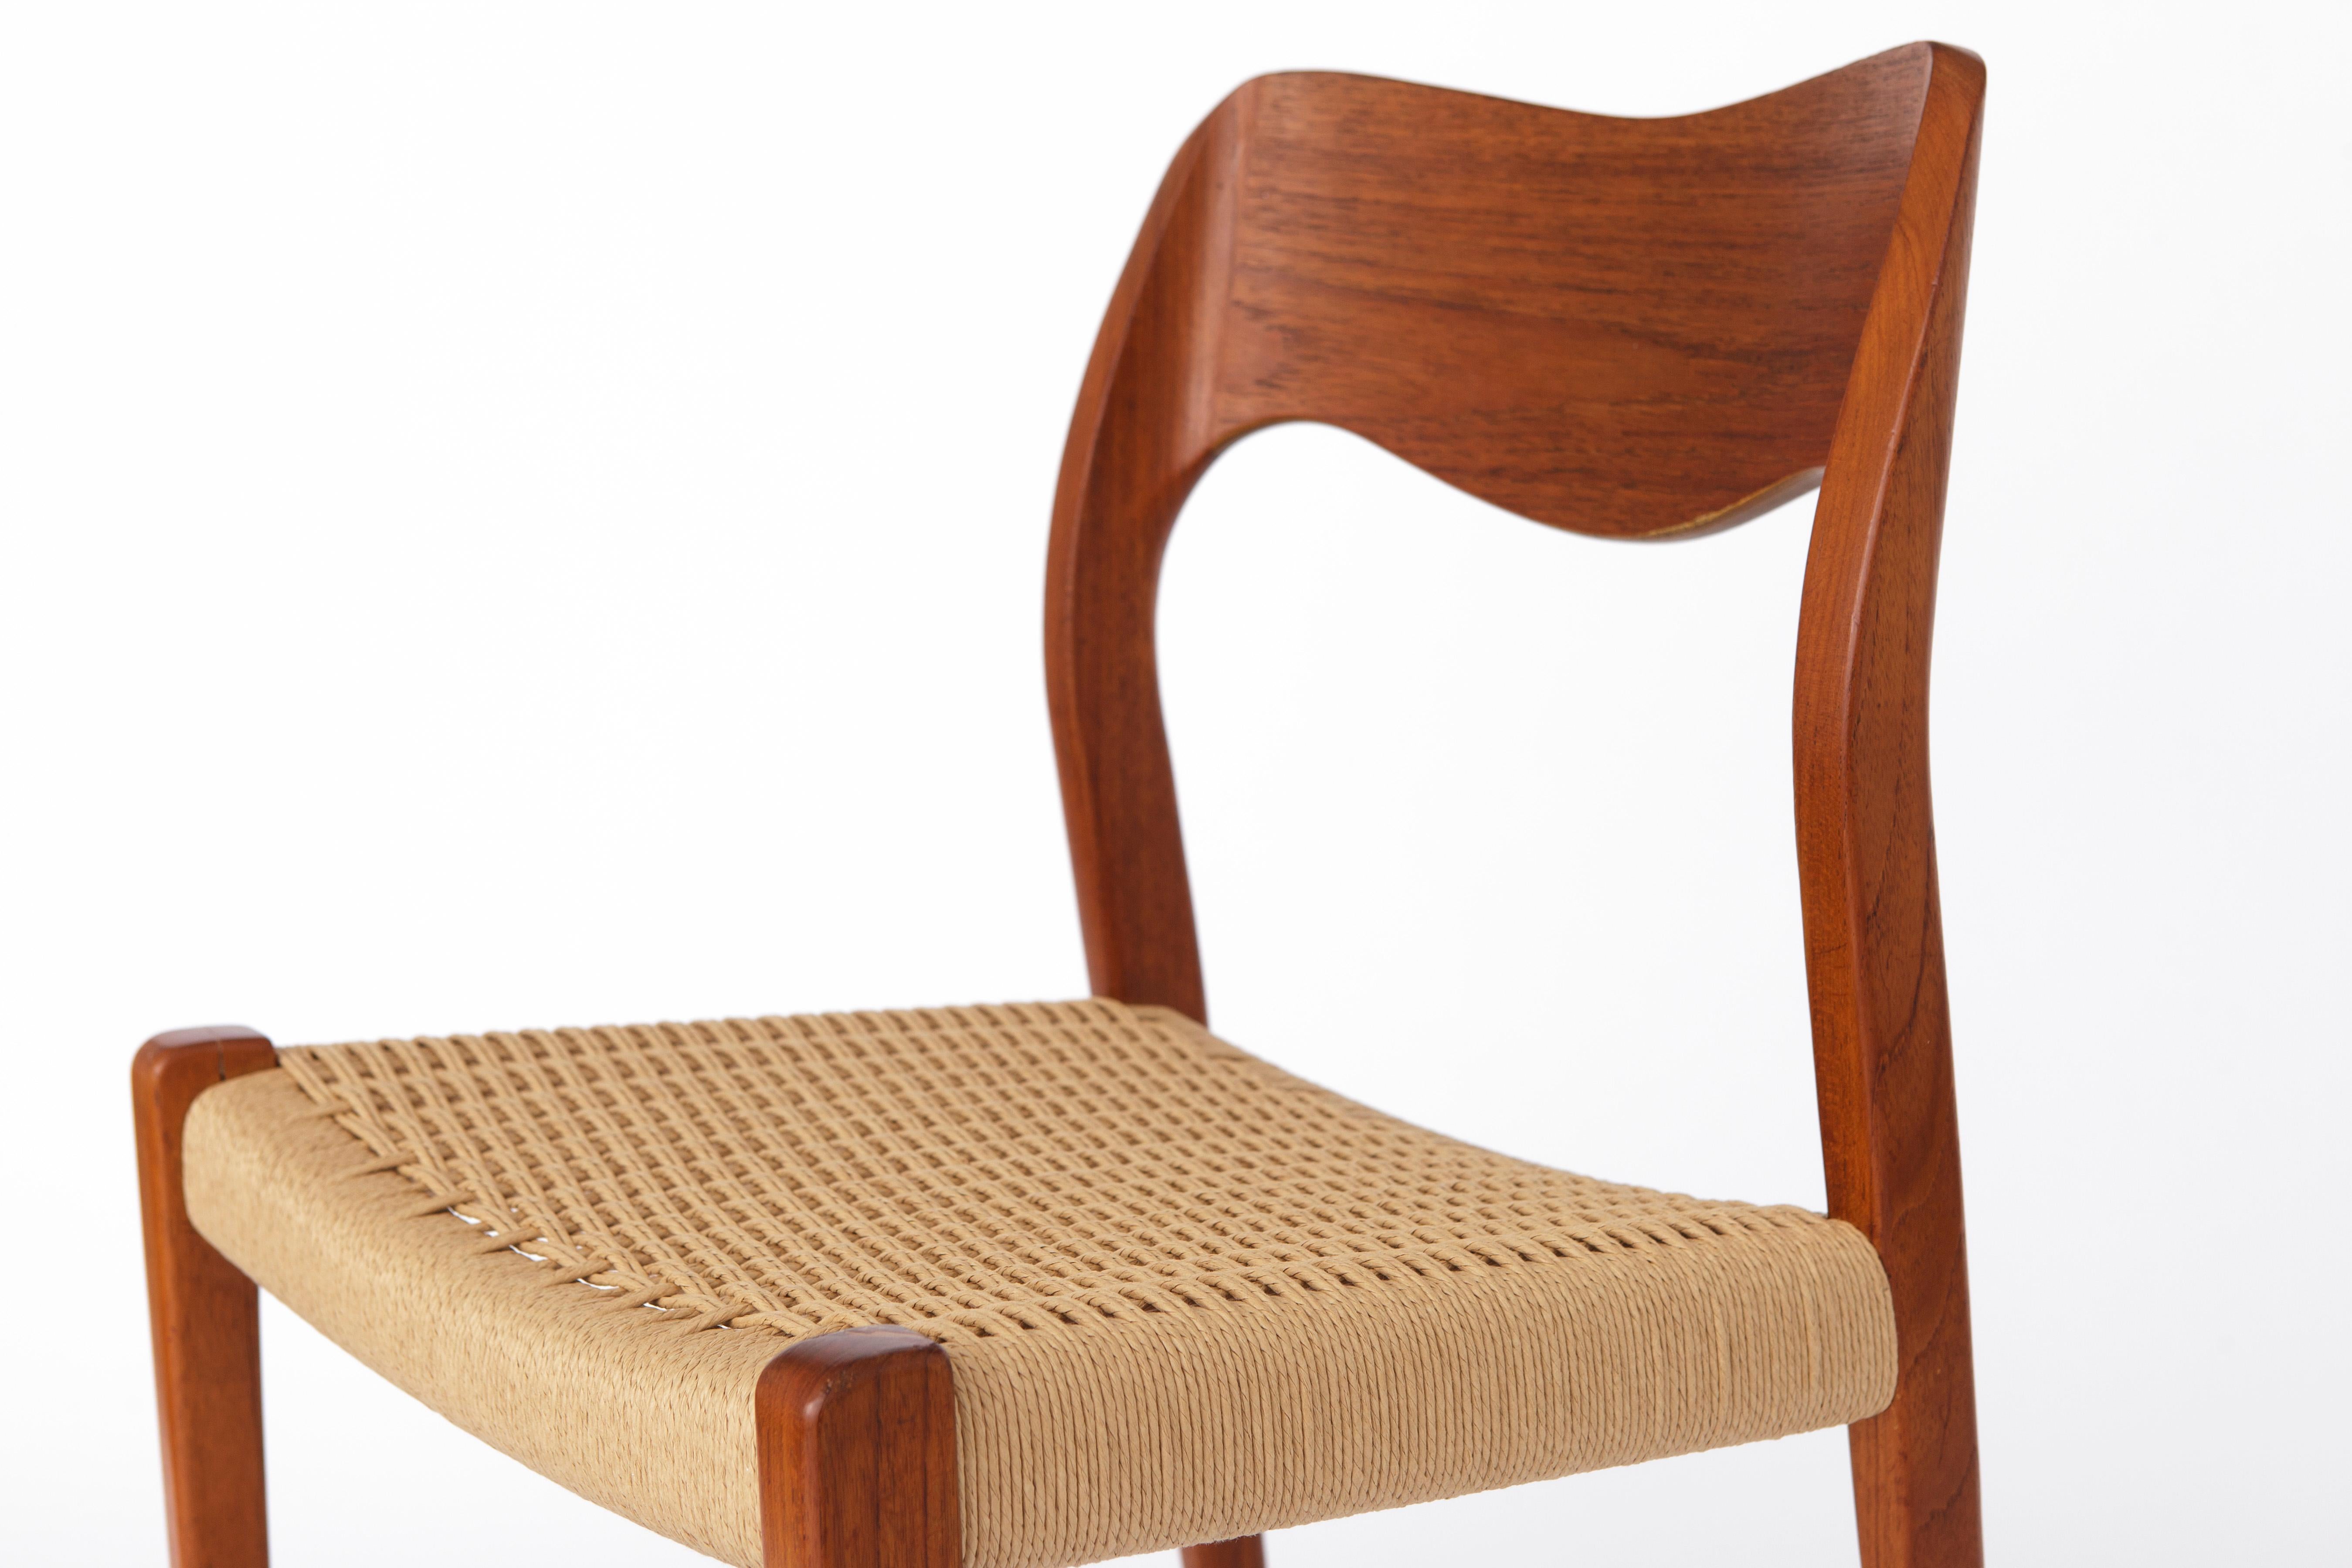 Polished Niels Moller Chair, Model 71, 1950s Vintage Teak - Repaired For Sale